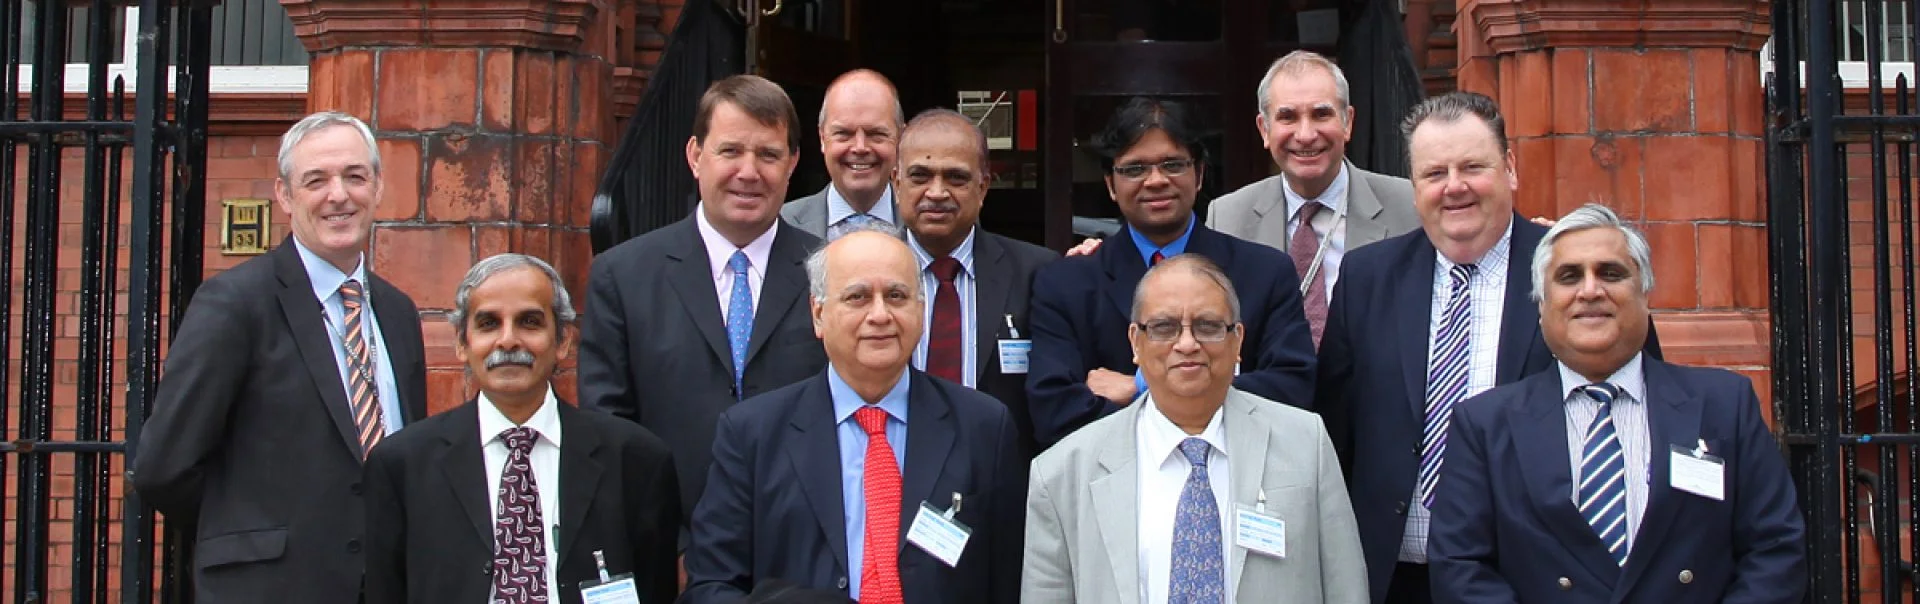 PD Ports welcomes delegates of the Indian Chemical Council